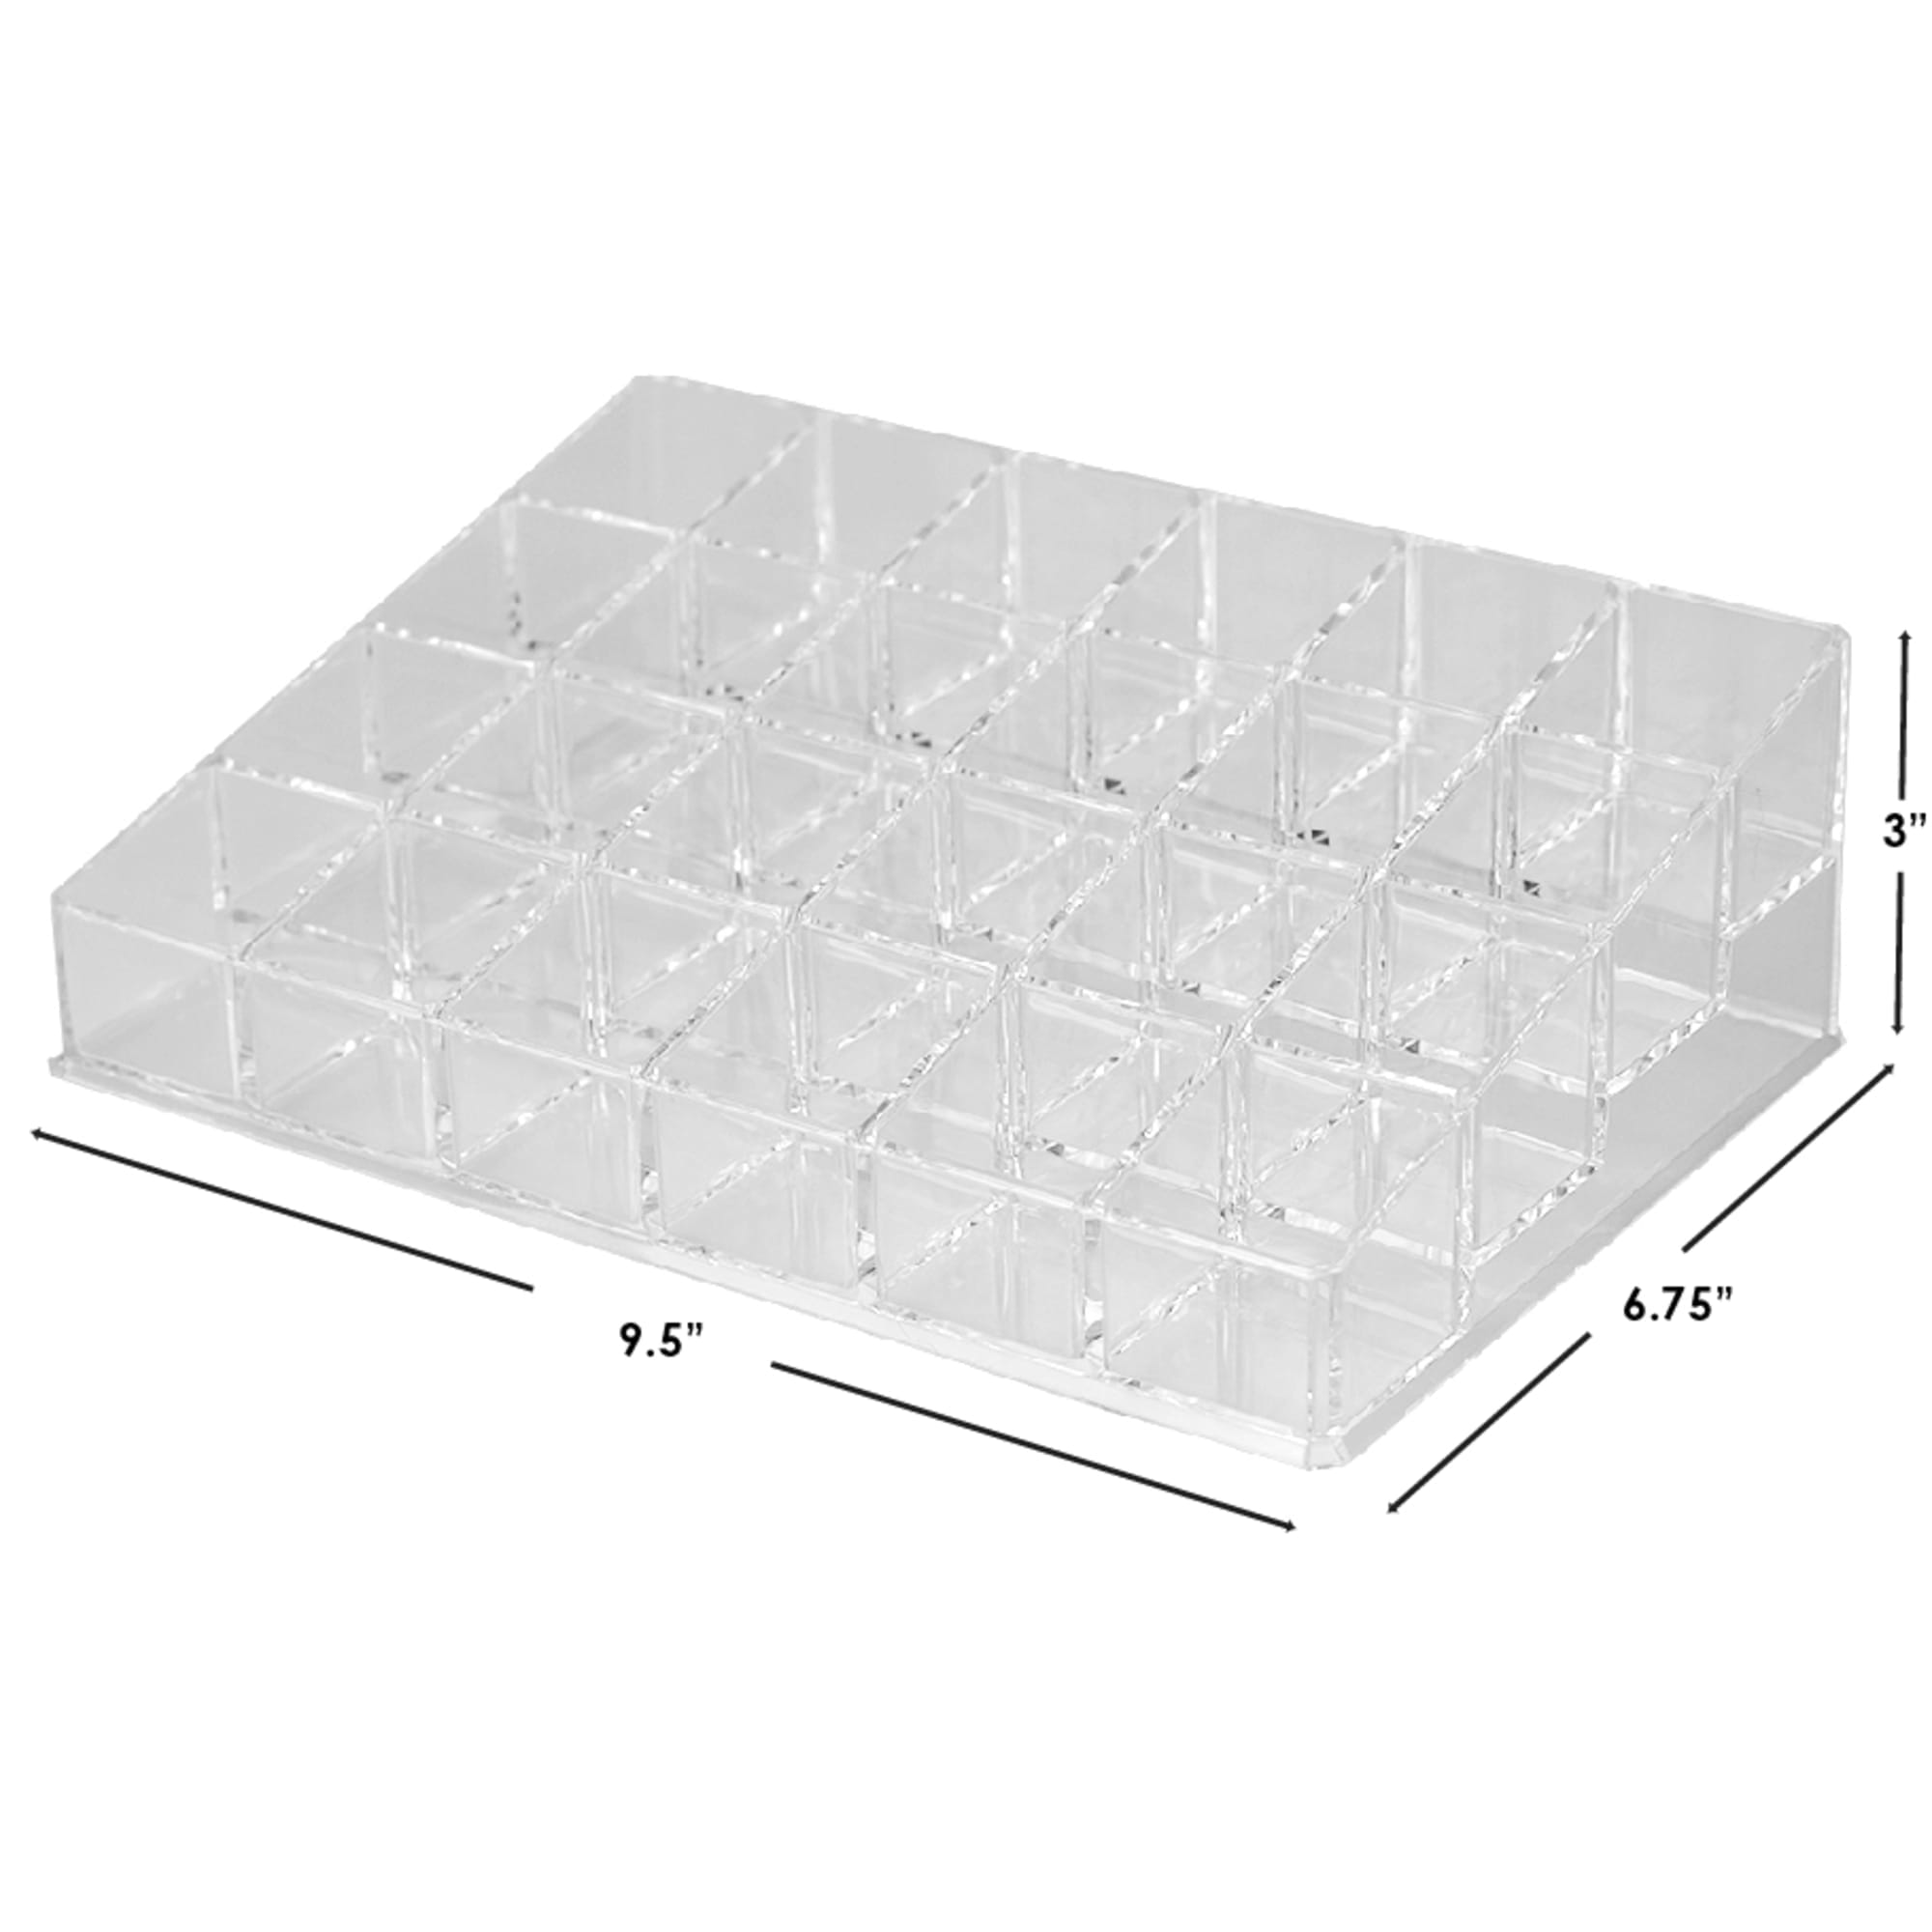 Home Basics 24 Compartment Transparent Plastic Cosmetic Makeup and Nail Polish Storage Organizer Holder, Clear $5.00 EACH, CASE PACK OF 12